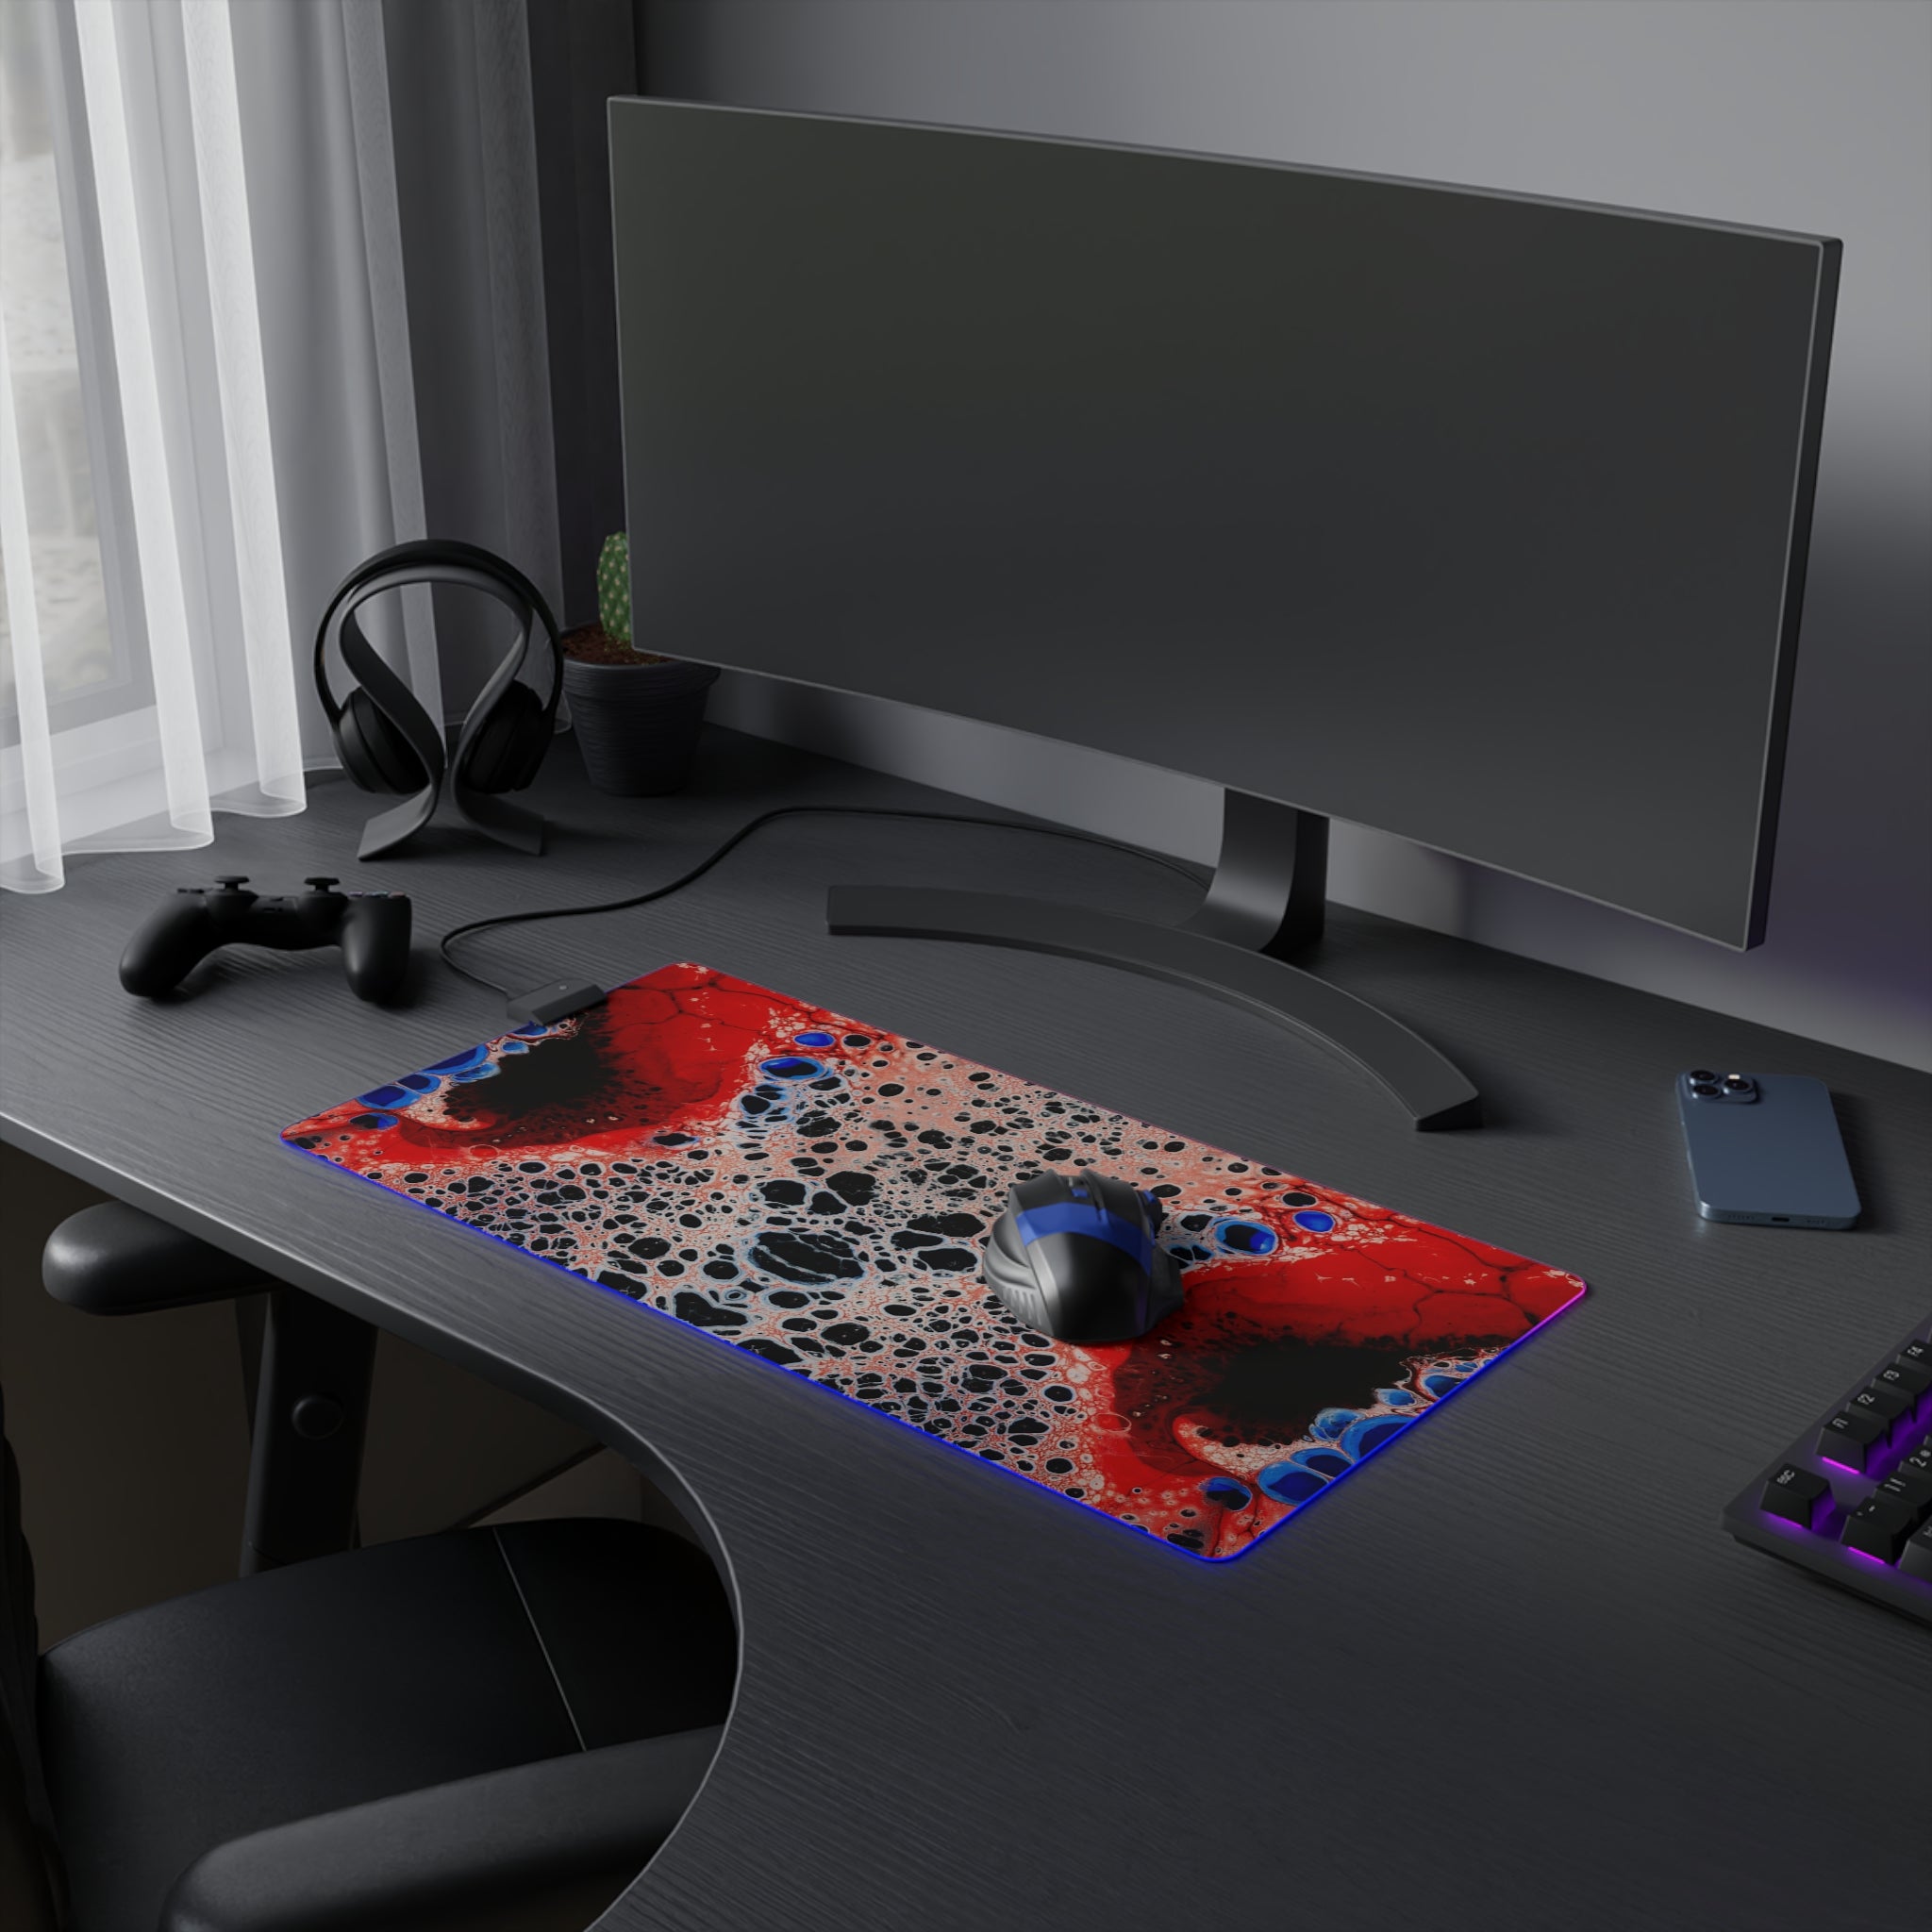 Cameron Creations - LED Gaming Mouse Pad - Abyss Of Emptiness - Concept 4